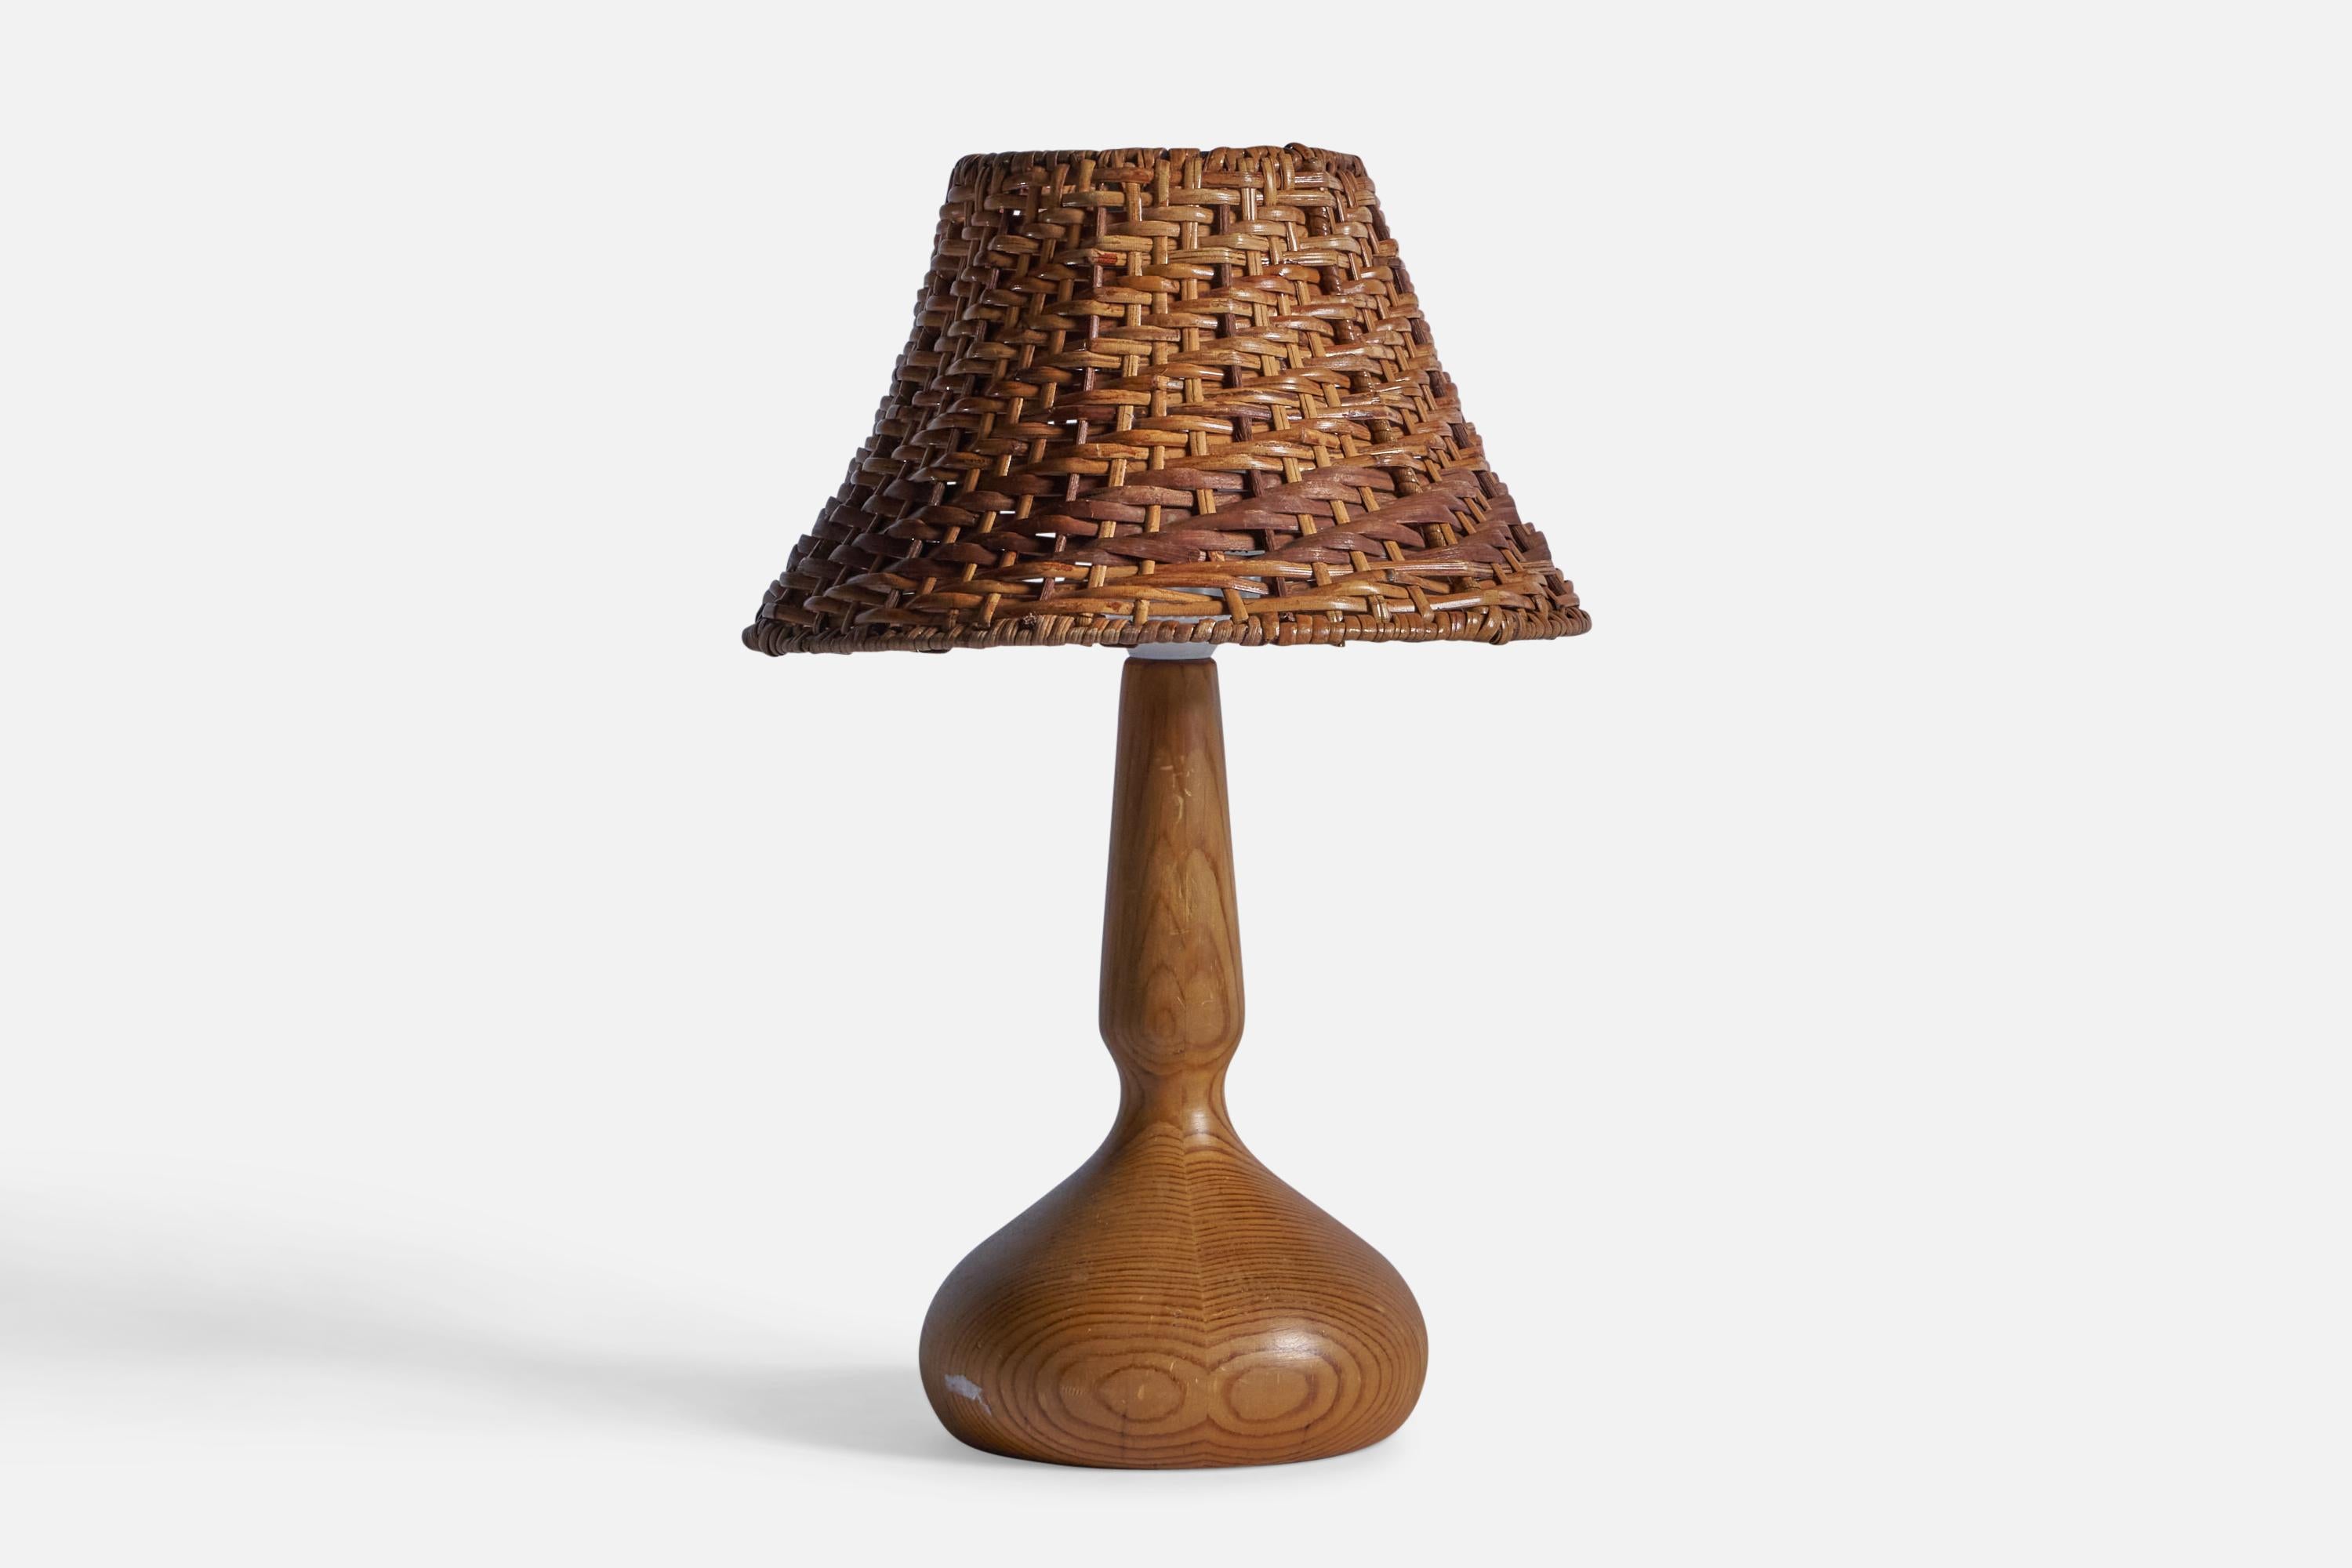 A pine and rattan table lamp, designed and produced in Sweden, 1970s.

Sold with Lampshade.

Dimensions stated are of table lamp with Lampshade attached.